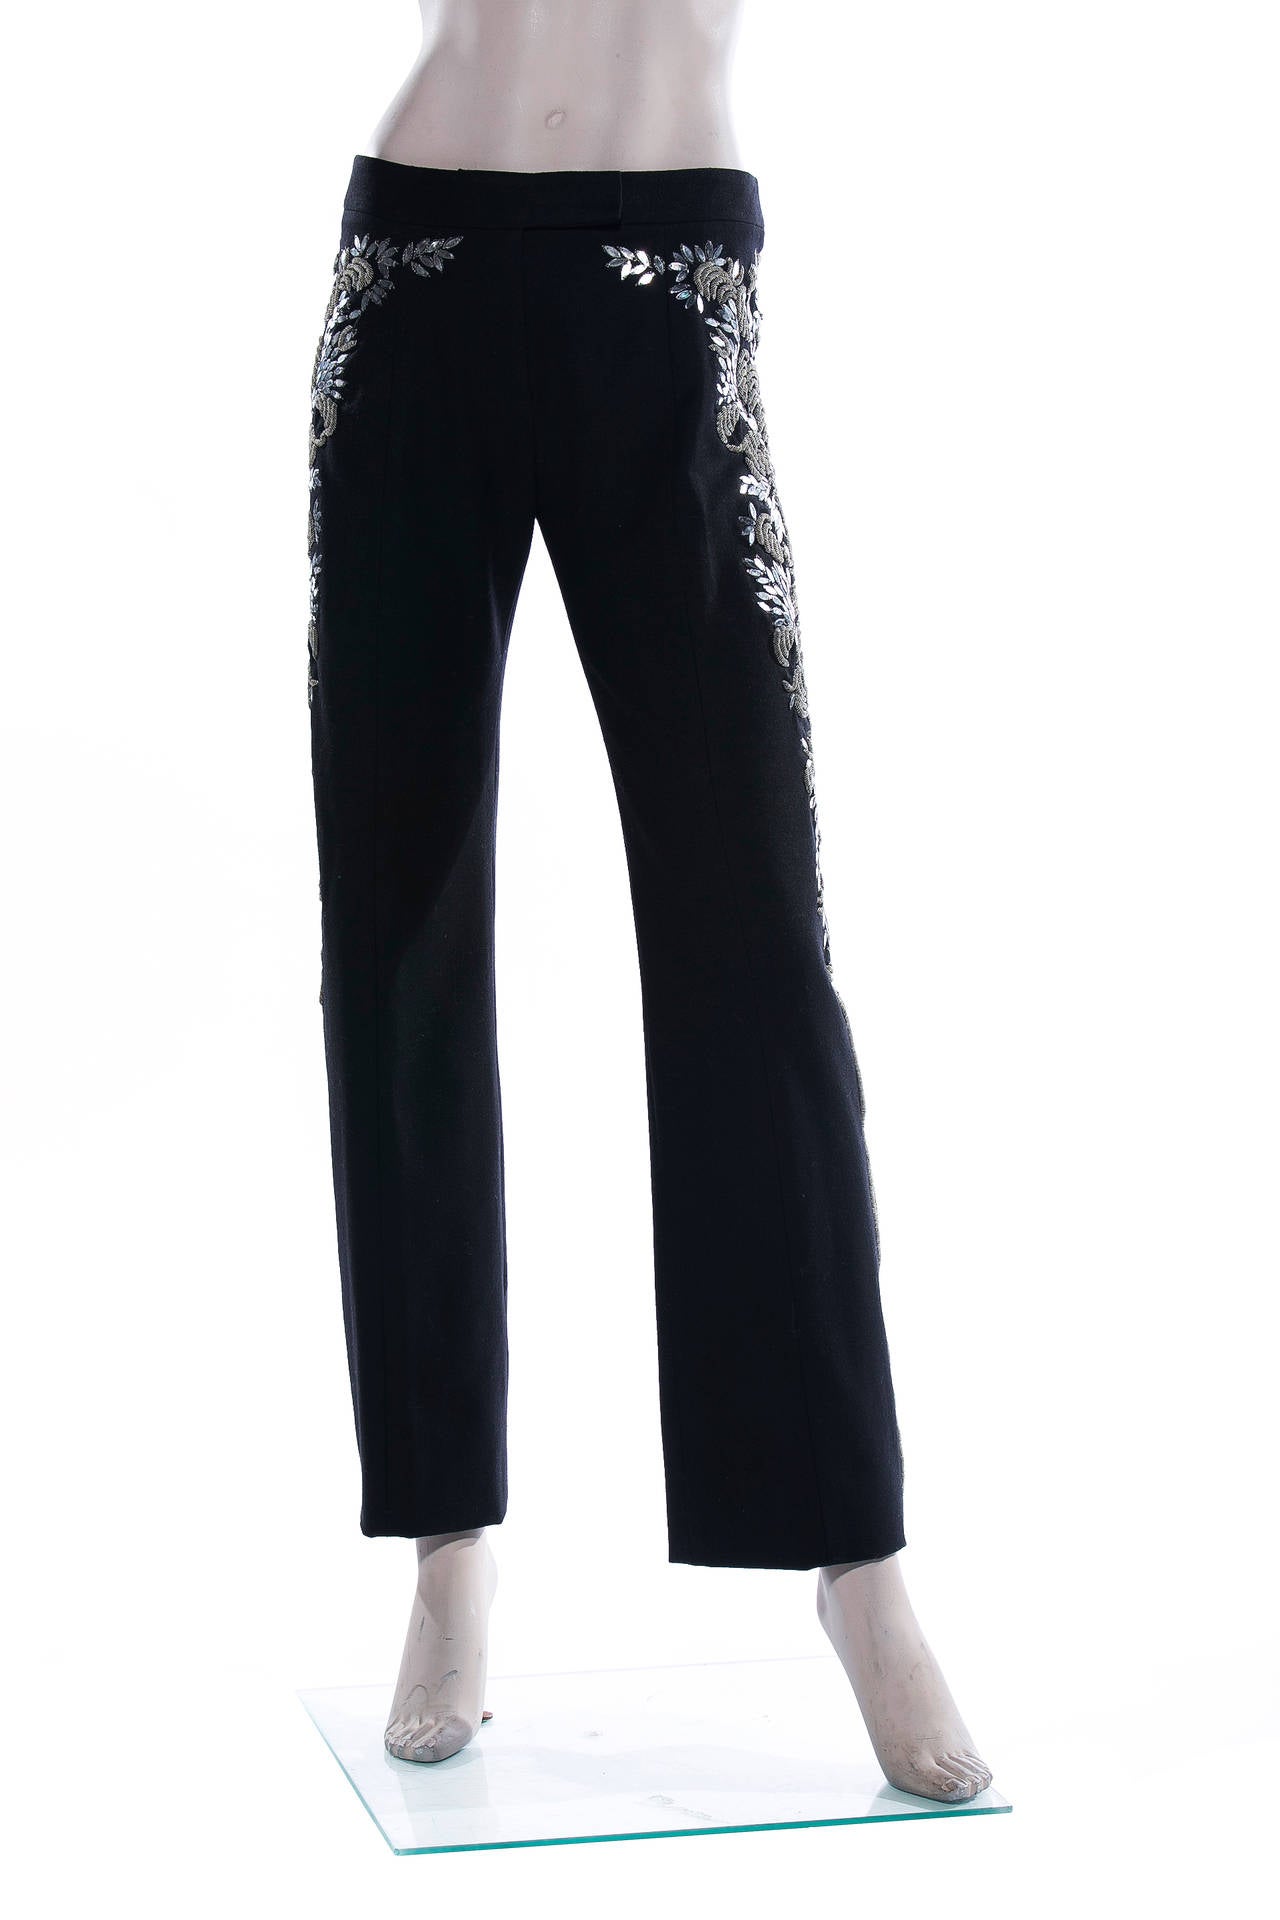 Alexander McQueen, Autumn-Winter 2006, black embroidered wool pants with side panels of raised silver purl wire and elliptical sequined paillettes, front zip.  Size not listed, estimated from measurements.

Waist 29”, Hip 36”, Rise 9.5”, Inseam